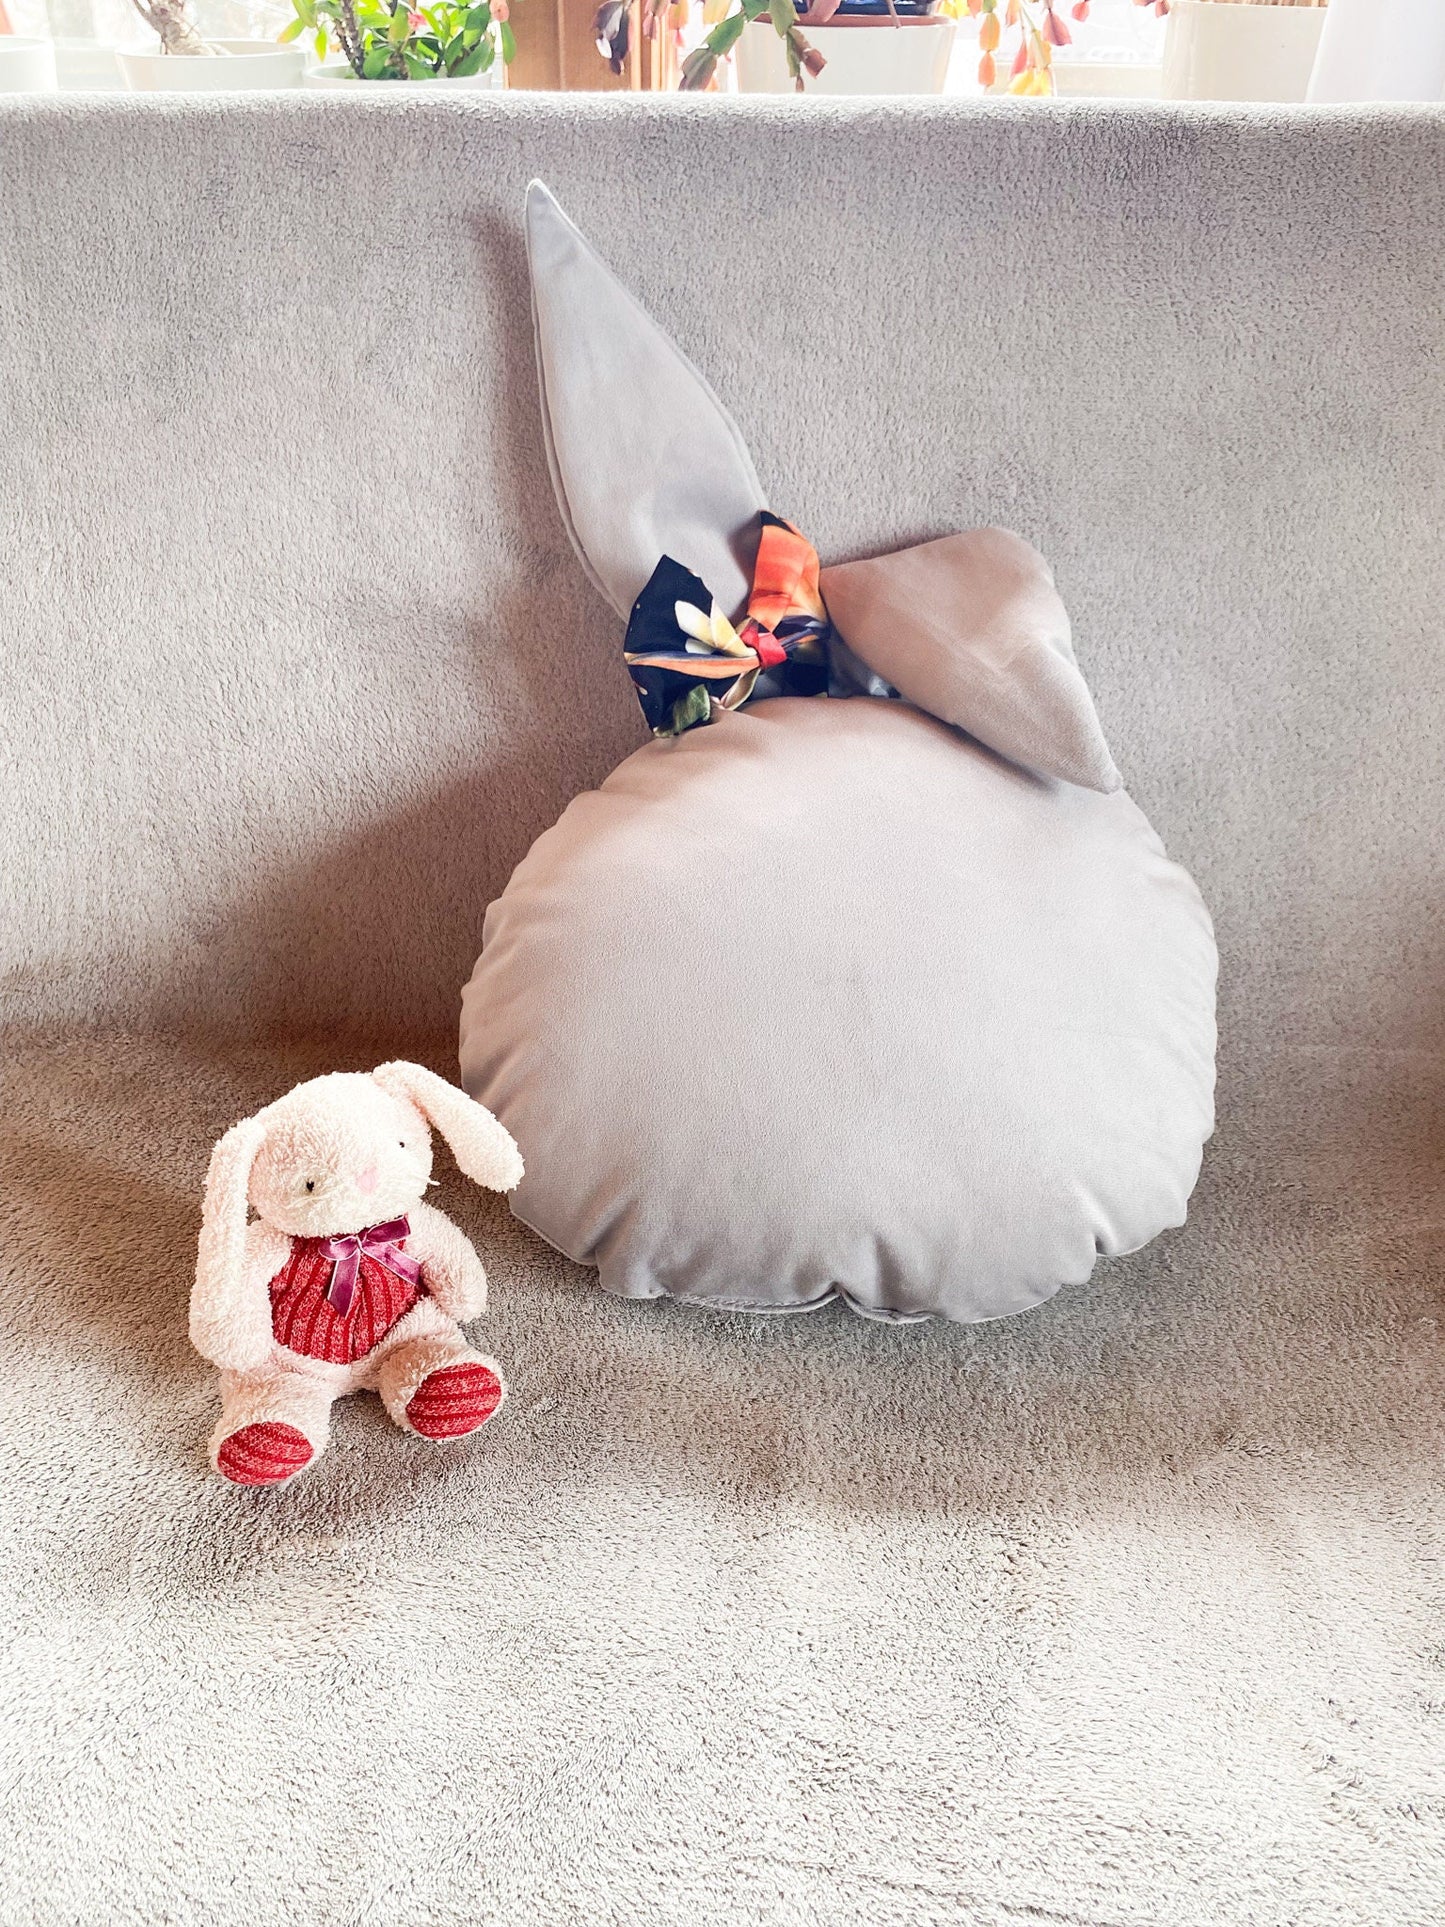 Cute Bunny Shaped Cushion - Soft and Plush Rabbit Pillow - Handmade for Snuggles - Ideal for Kids' Rooms and Nursery Decor